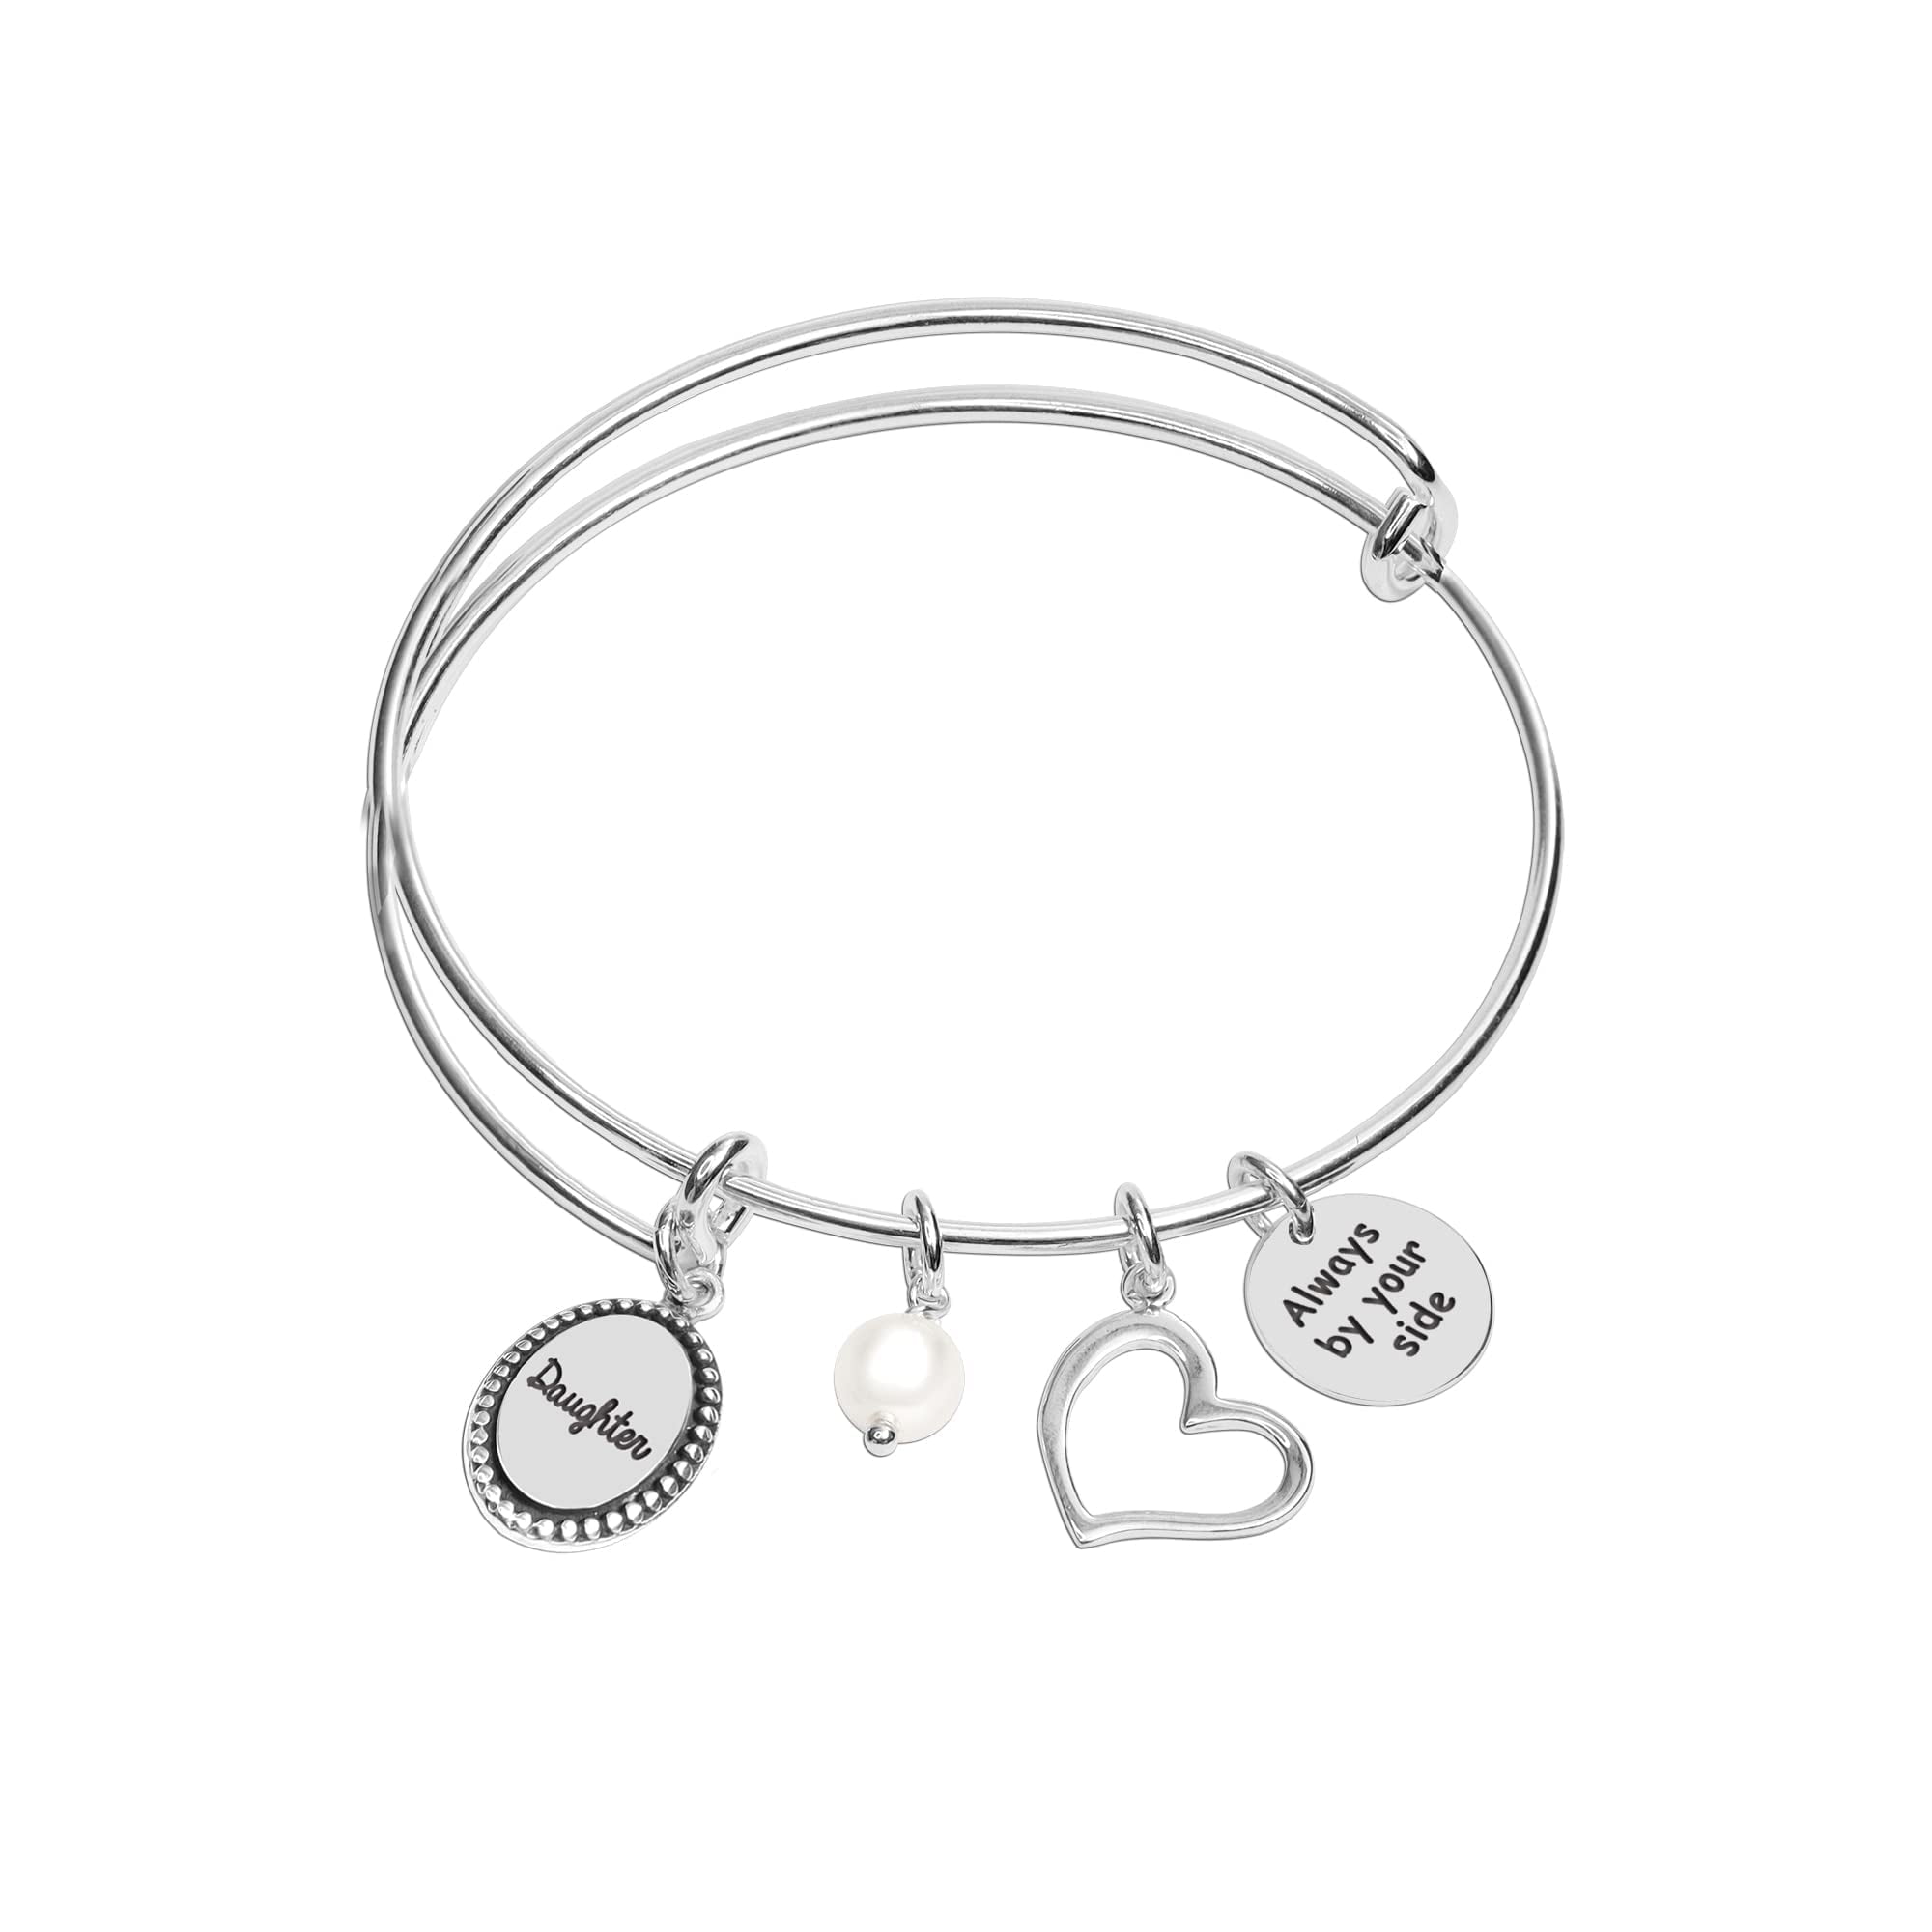 Sister Charm Compass Bangle Bracelet for Women - Side By Side or